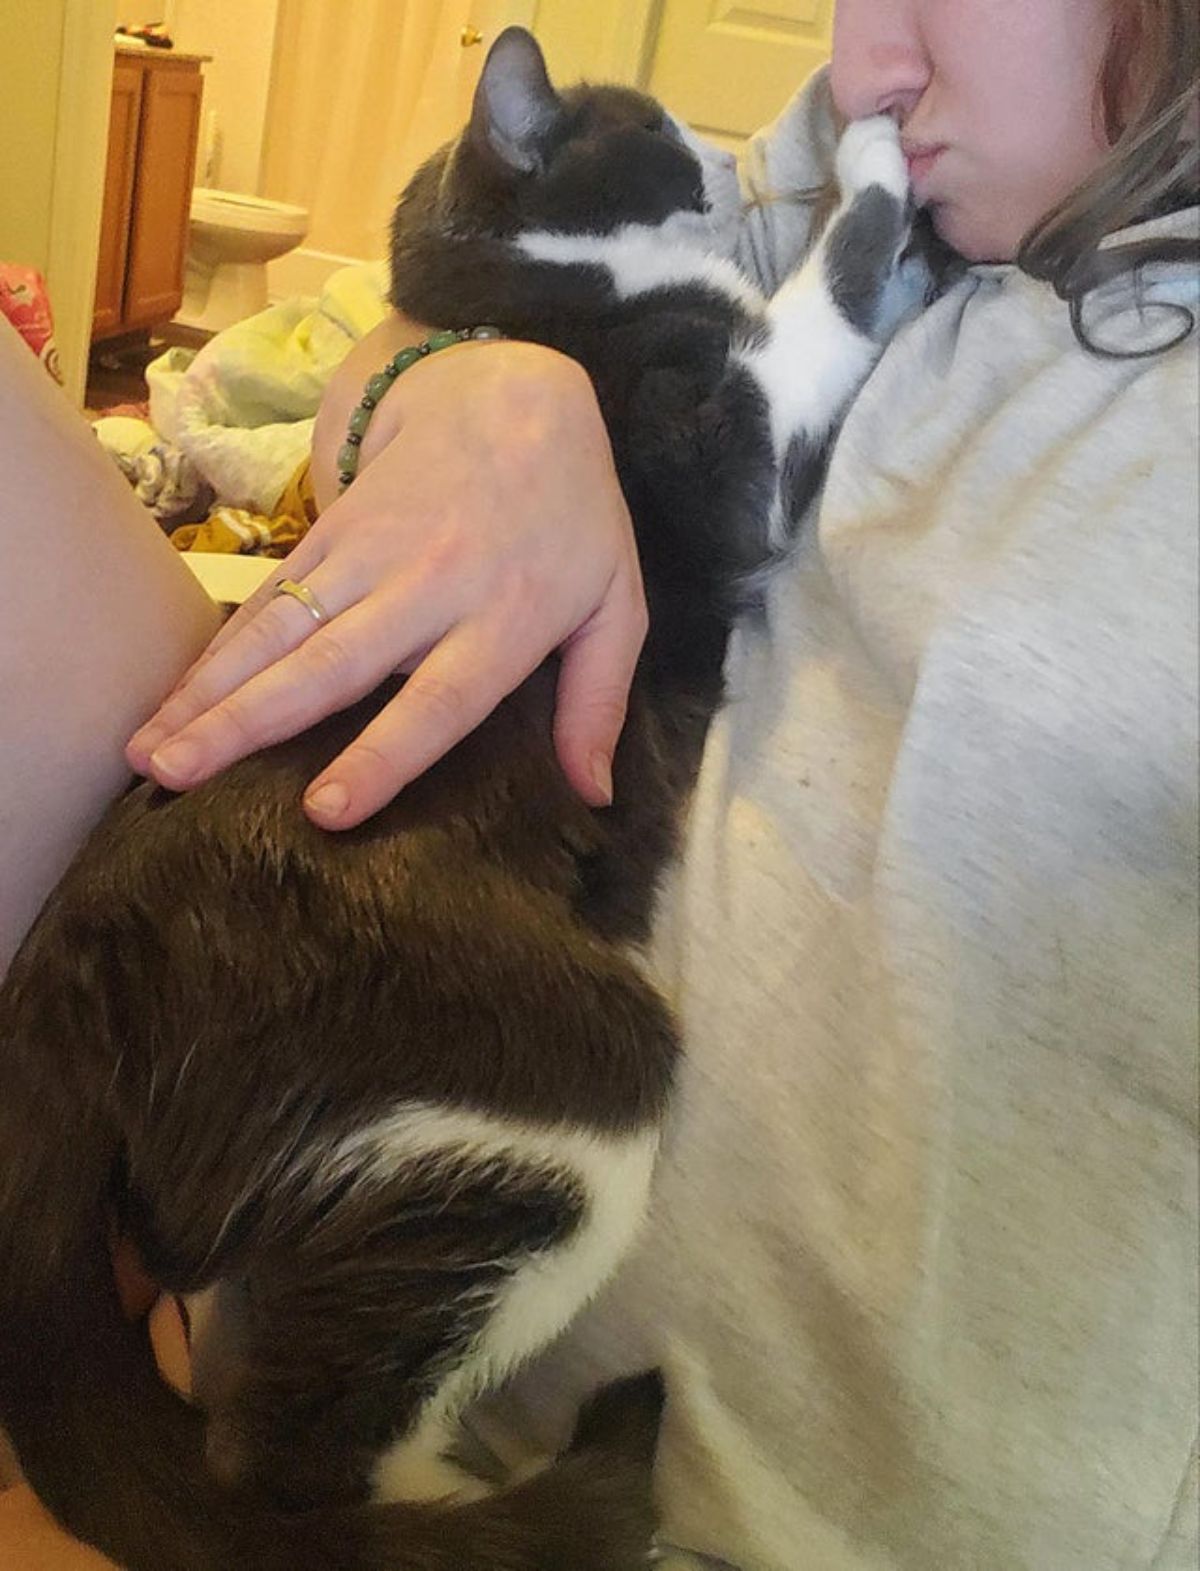 black and white cat getting hugged by a woman and the cat is placing a paw on the person's mouth